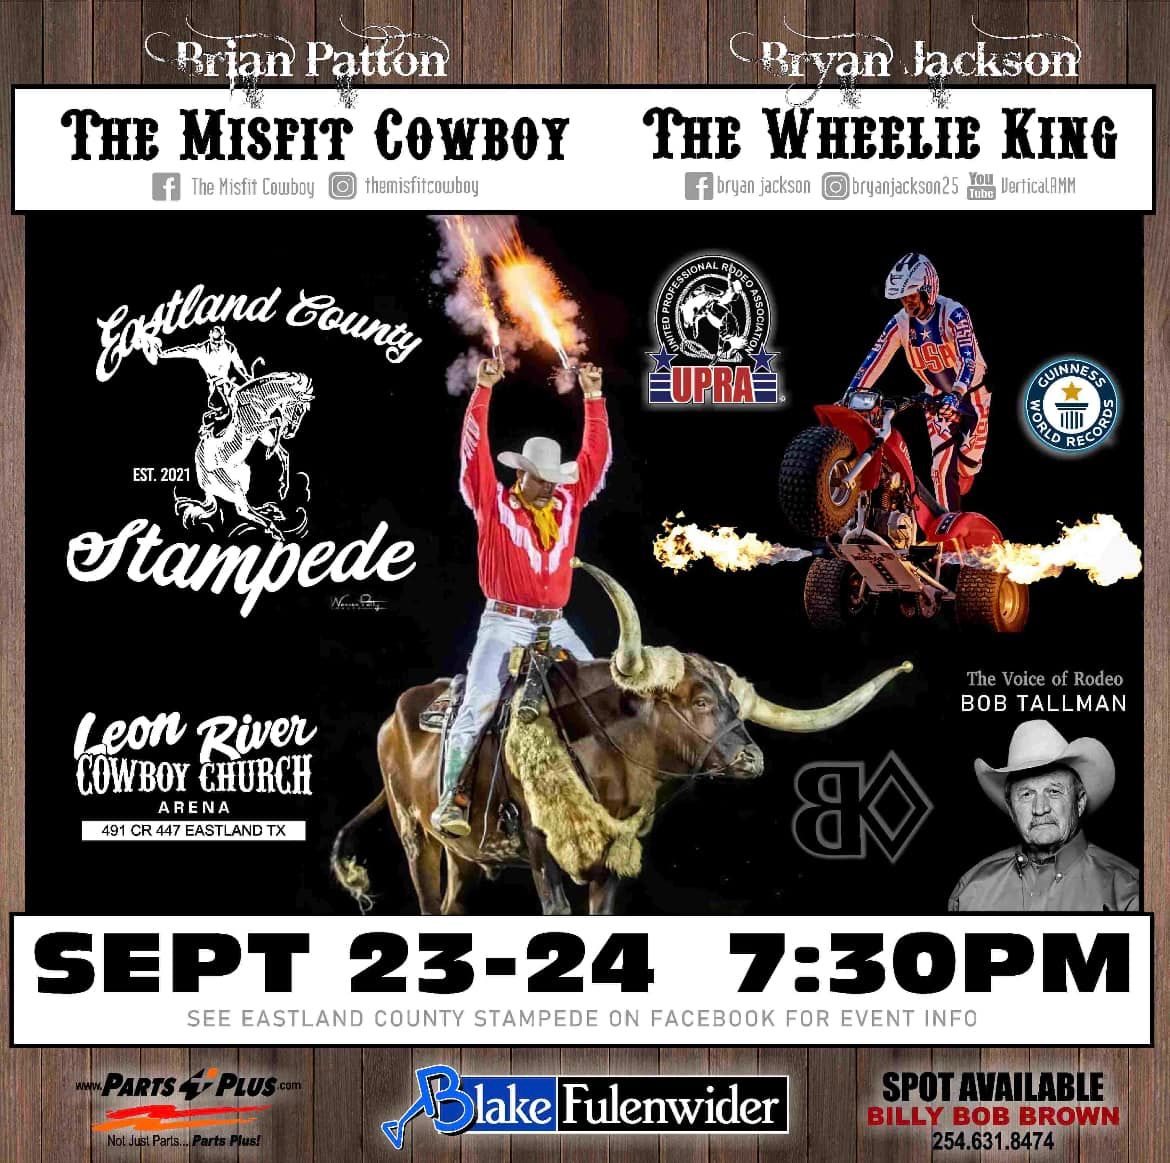 September 23-24 @ 7:30 PM.  Eastland County Stampede Rodeo featuring The Misfit Cowboy along with The Wheelie King...